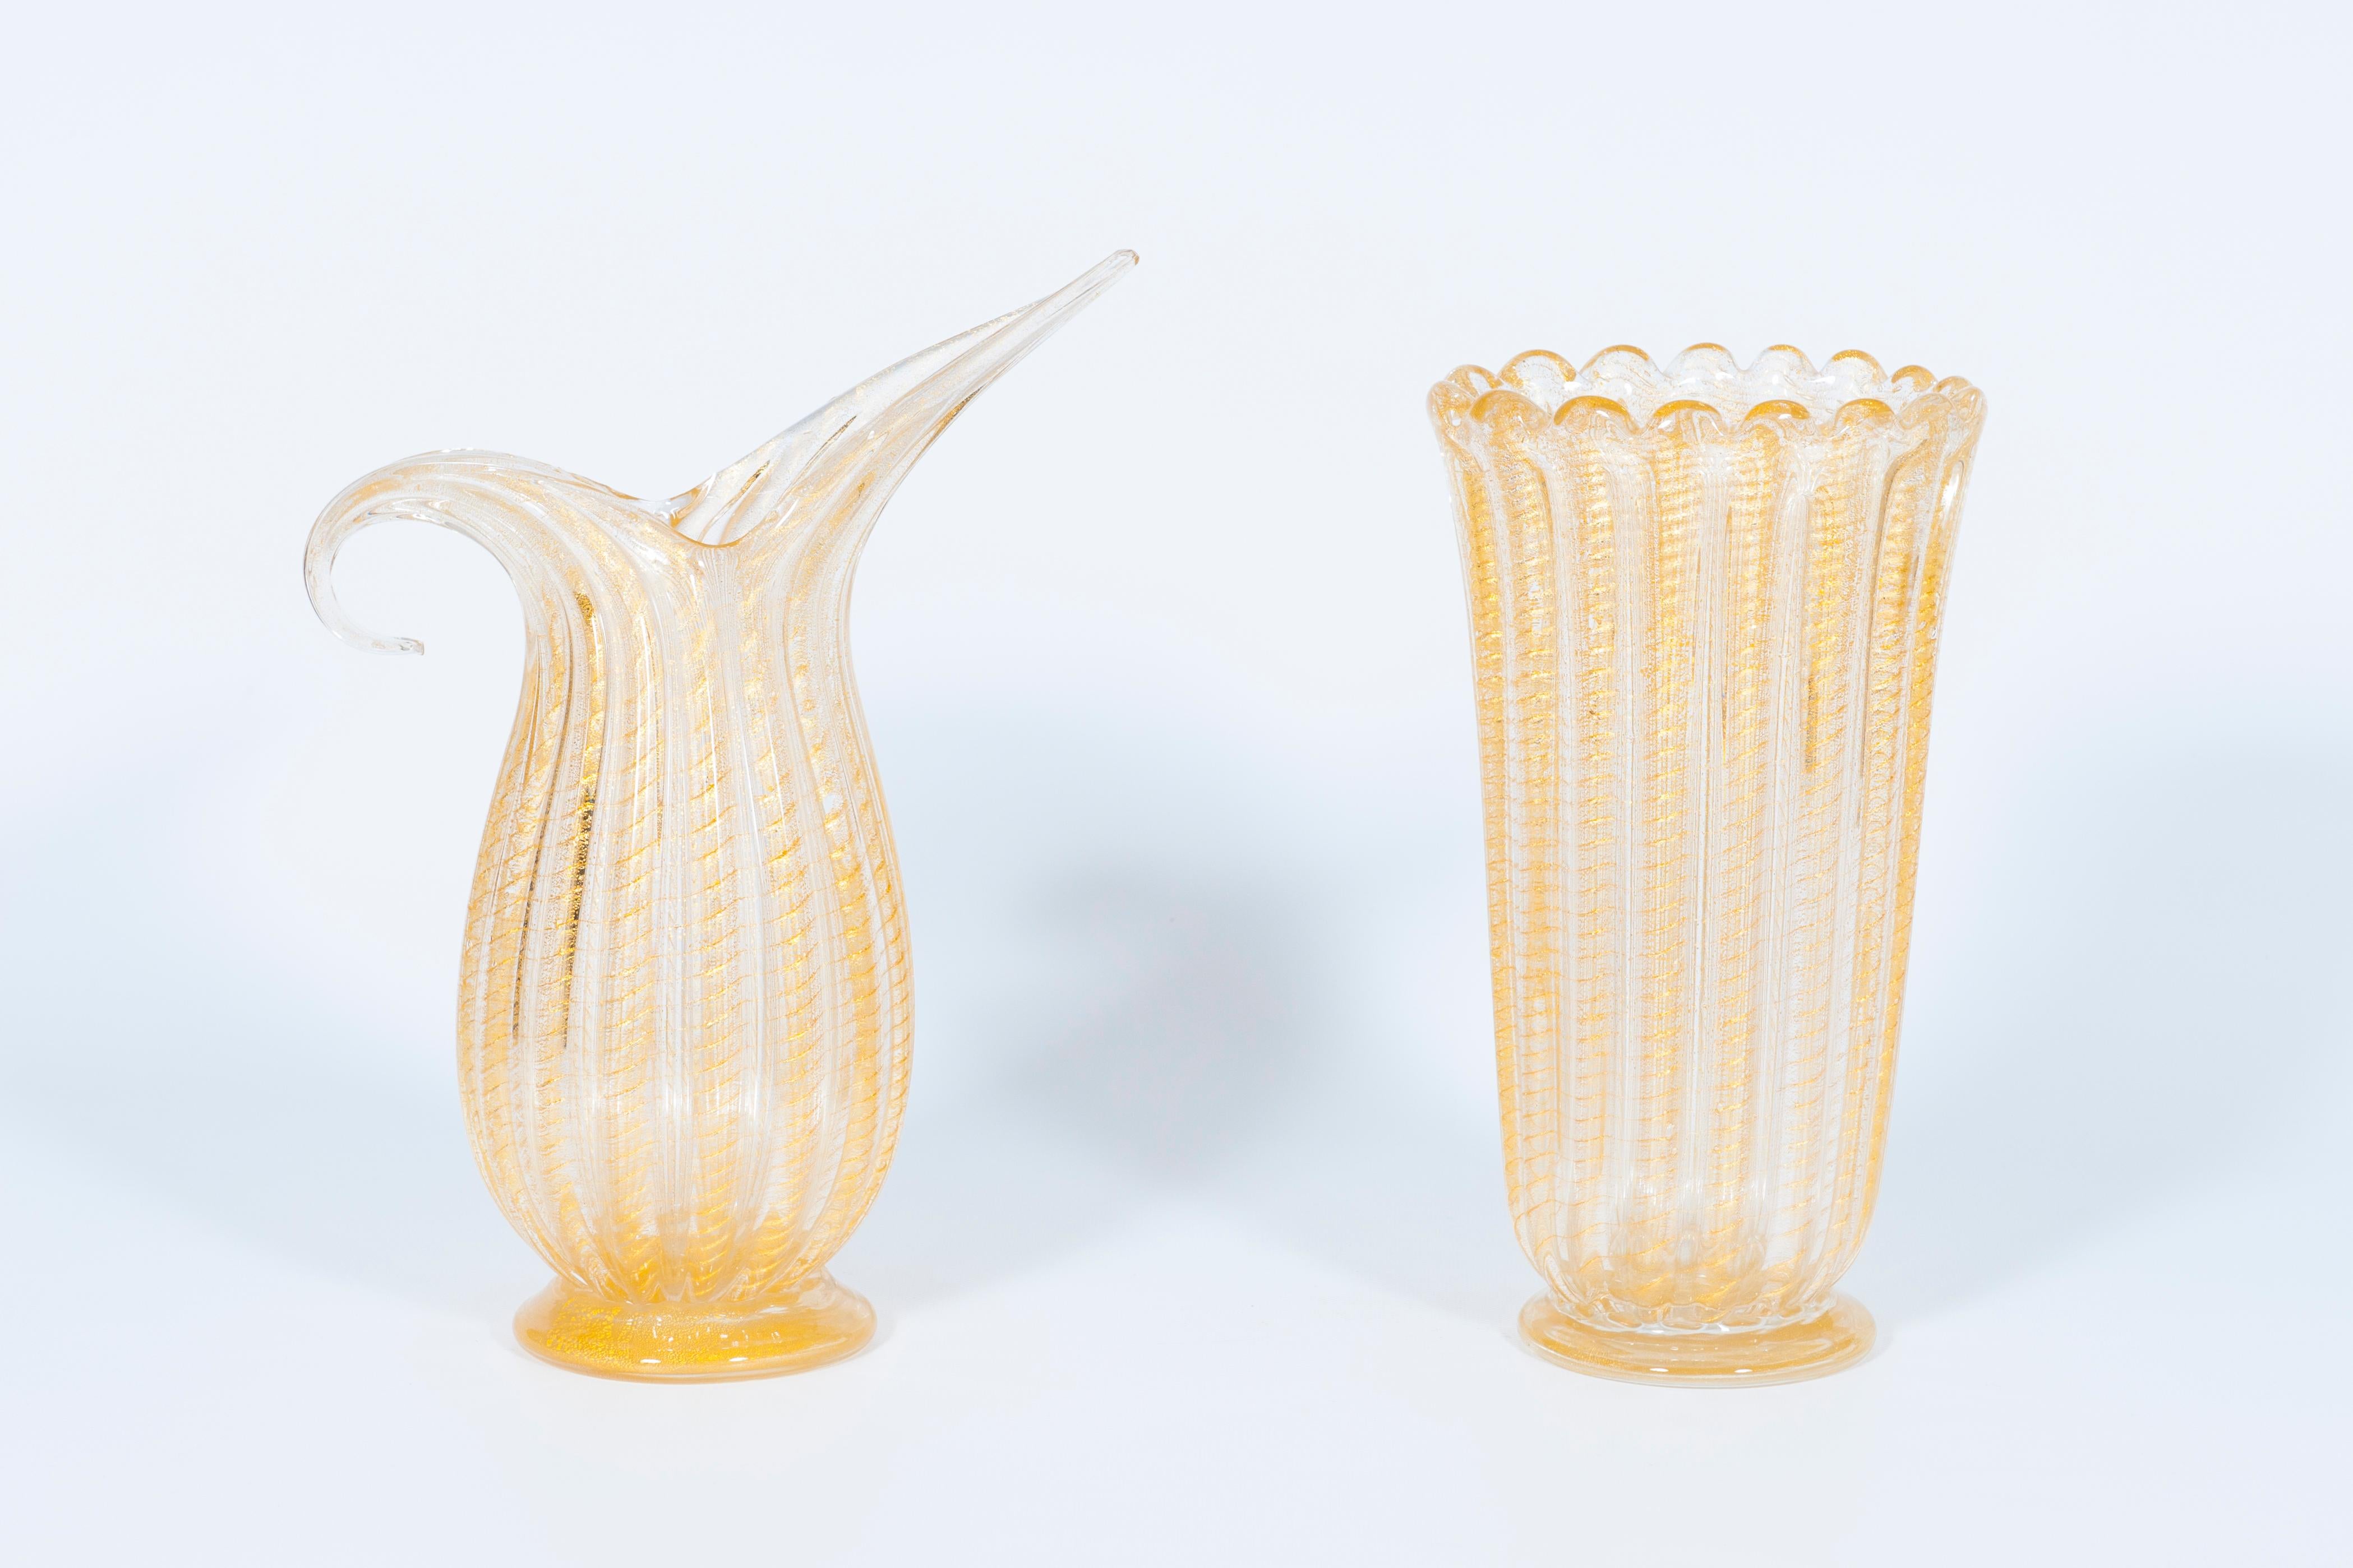 Set of Murano glass ribbed vase and pitcher with 24-karat gold, in style of Barovier, Italy, 1980s.
The masterpieces come in different shapes: one has an oval base and an undulated edge on top, while the other is a pitcher with a stylized handle